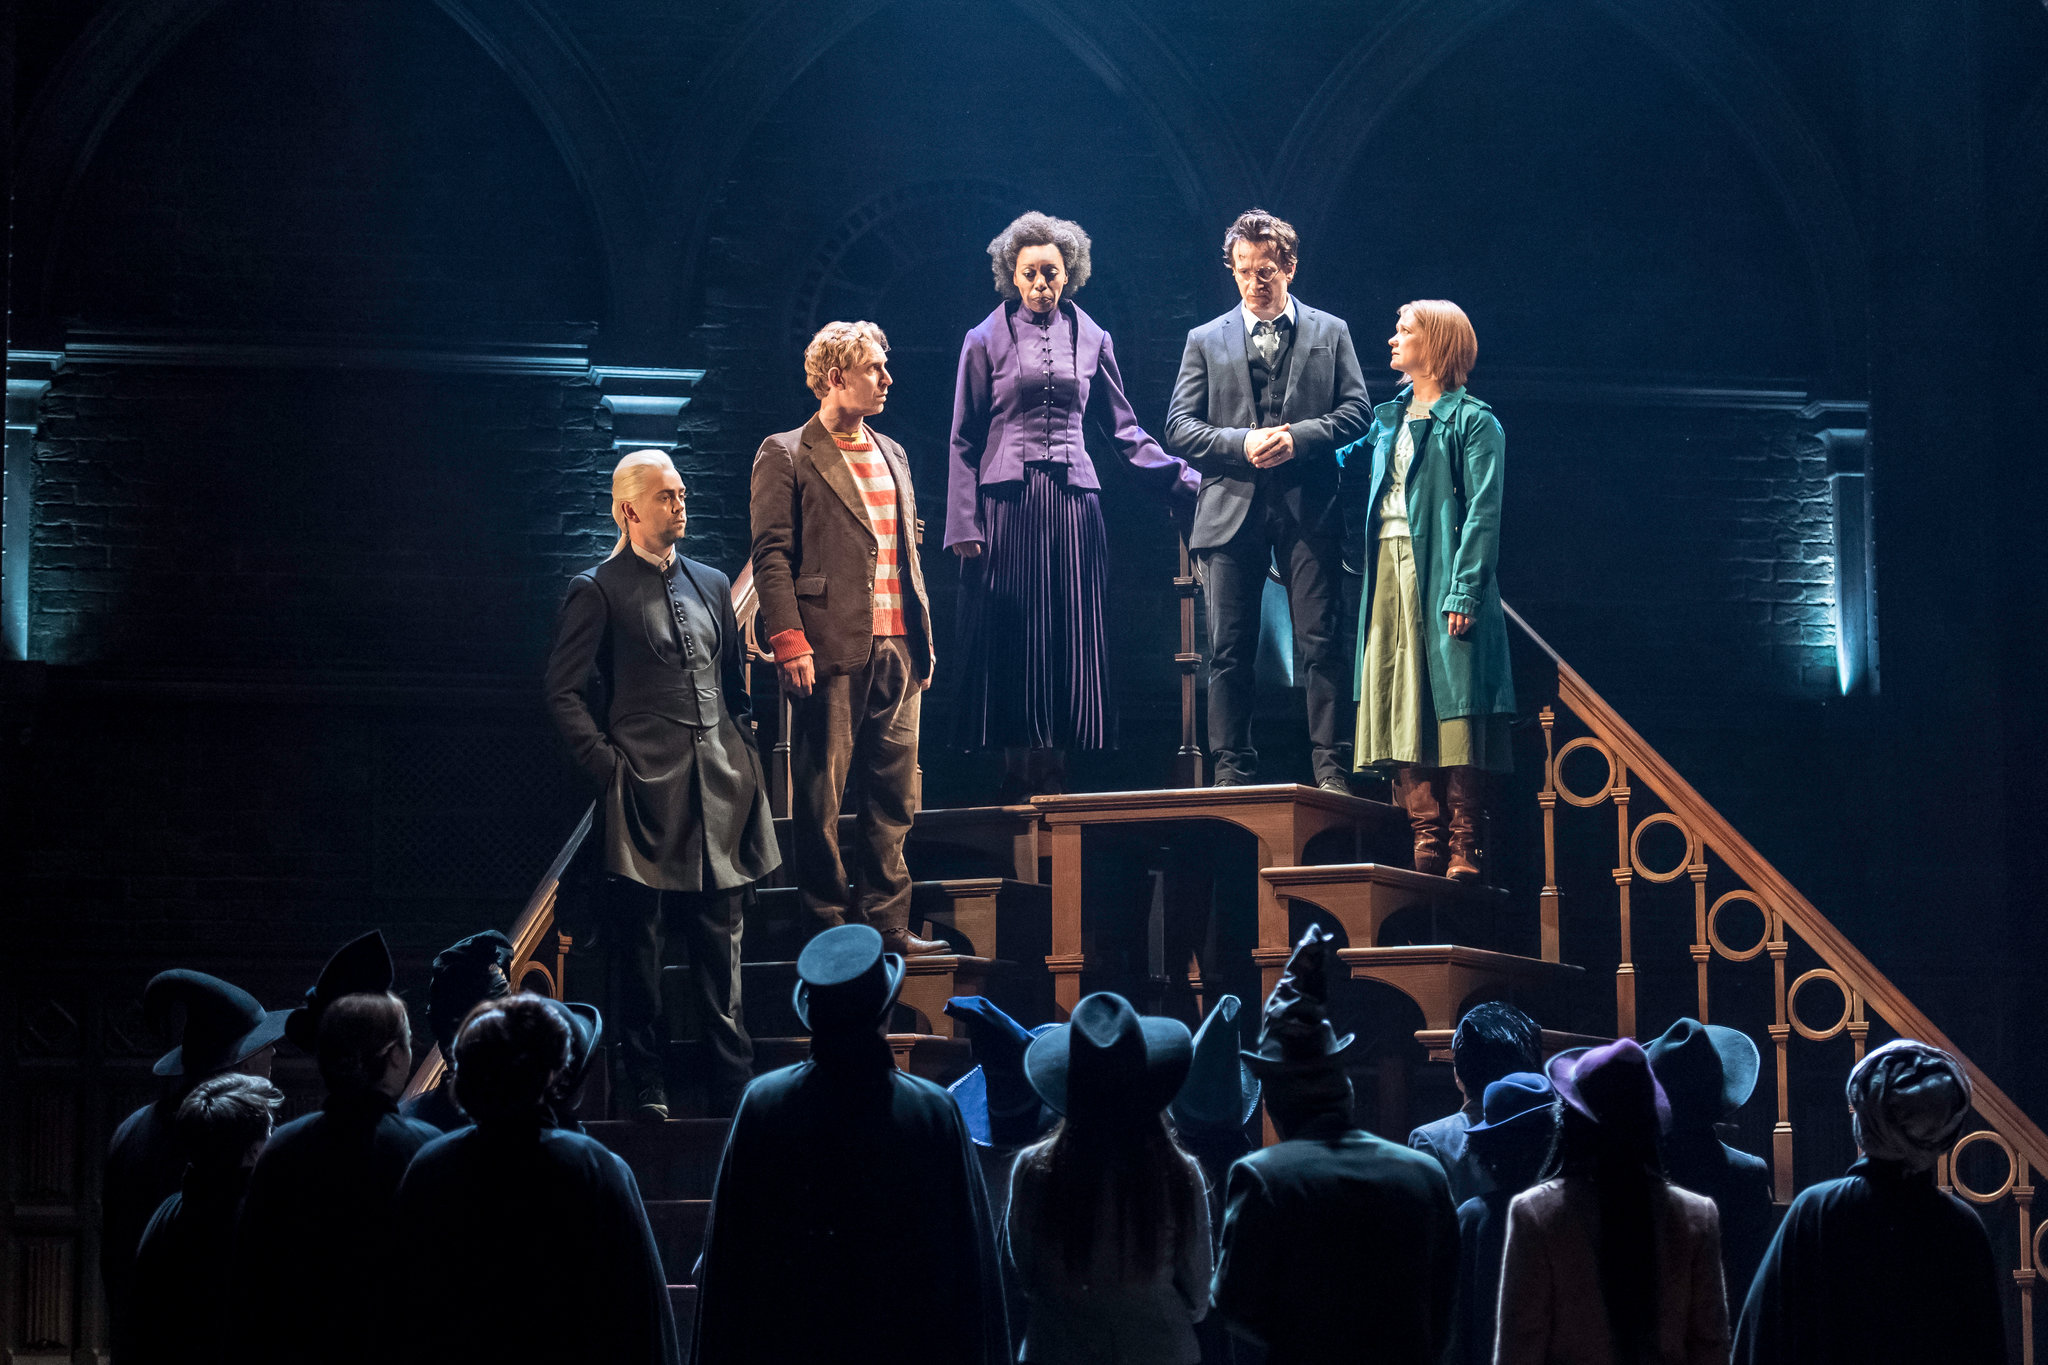 Harry Potter and The Cursed Child - Part 1 & 2 (10/22 7:30PM & 10/23 7:30PM) at Lyric Theatre